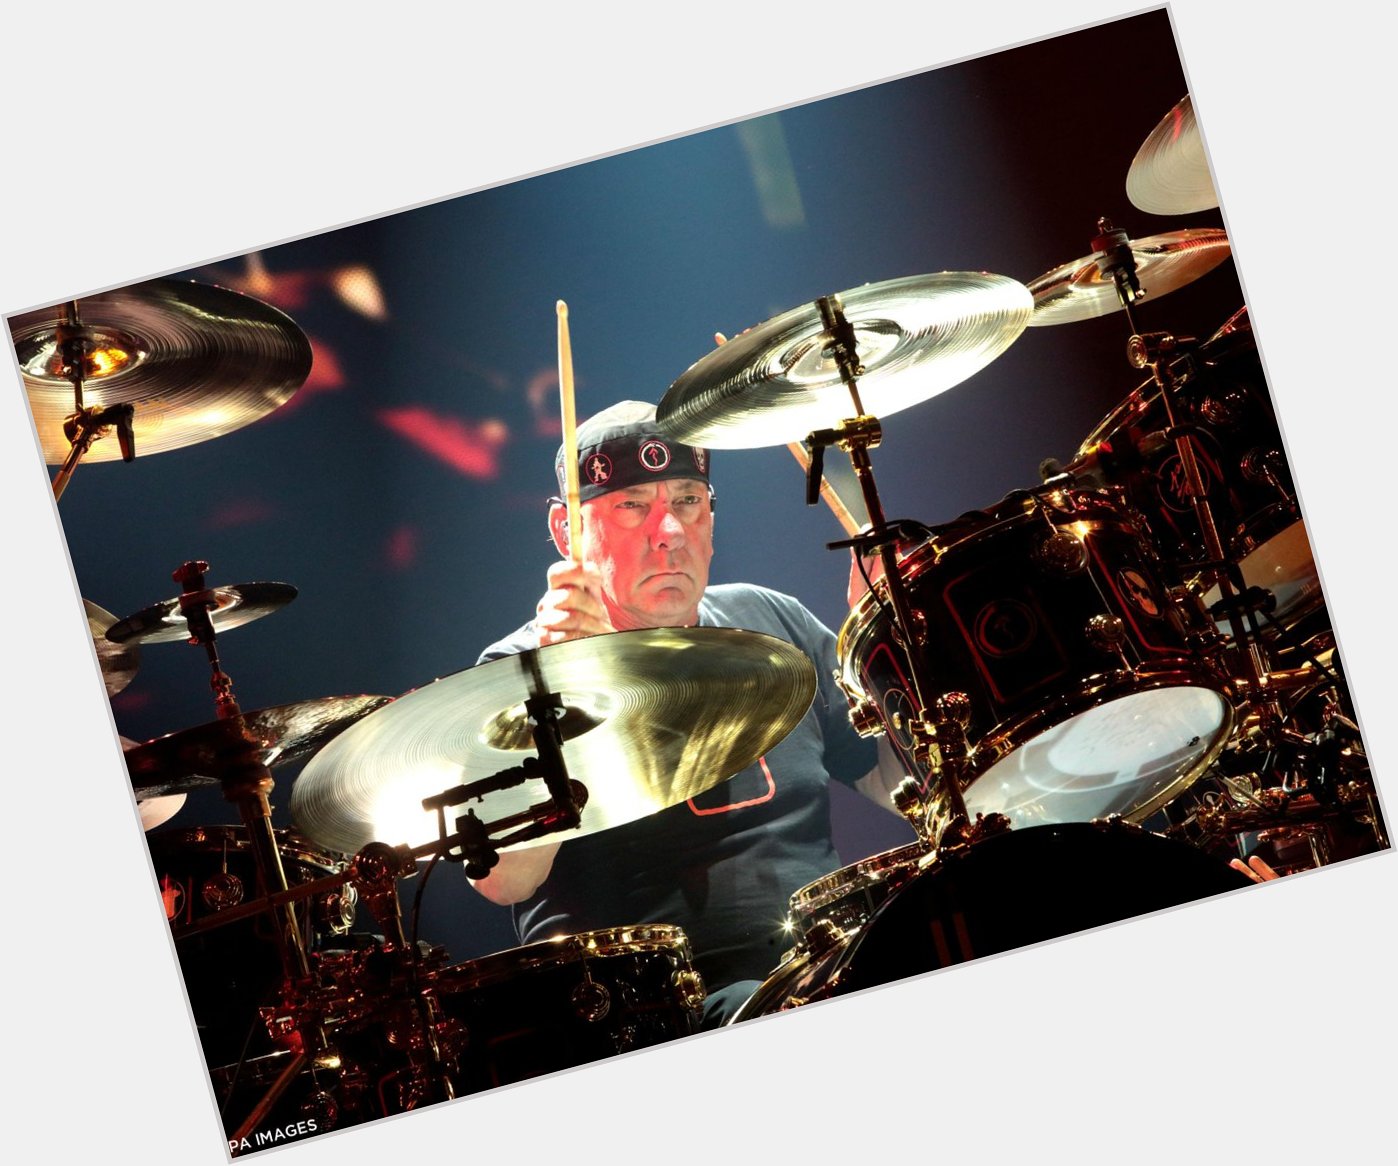 \We\re only immortal for a limited time\. So take a moment to wish Happy Birthday to Neil Peart of Rush on his 63rd. 